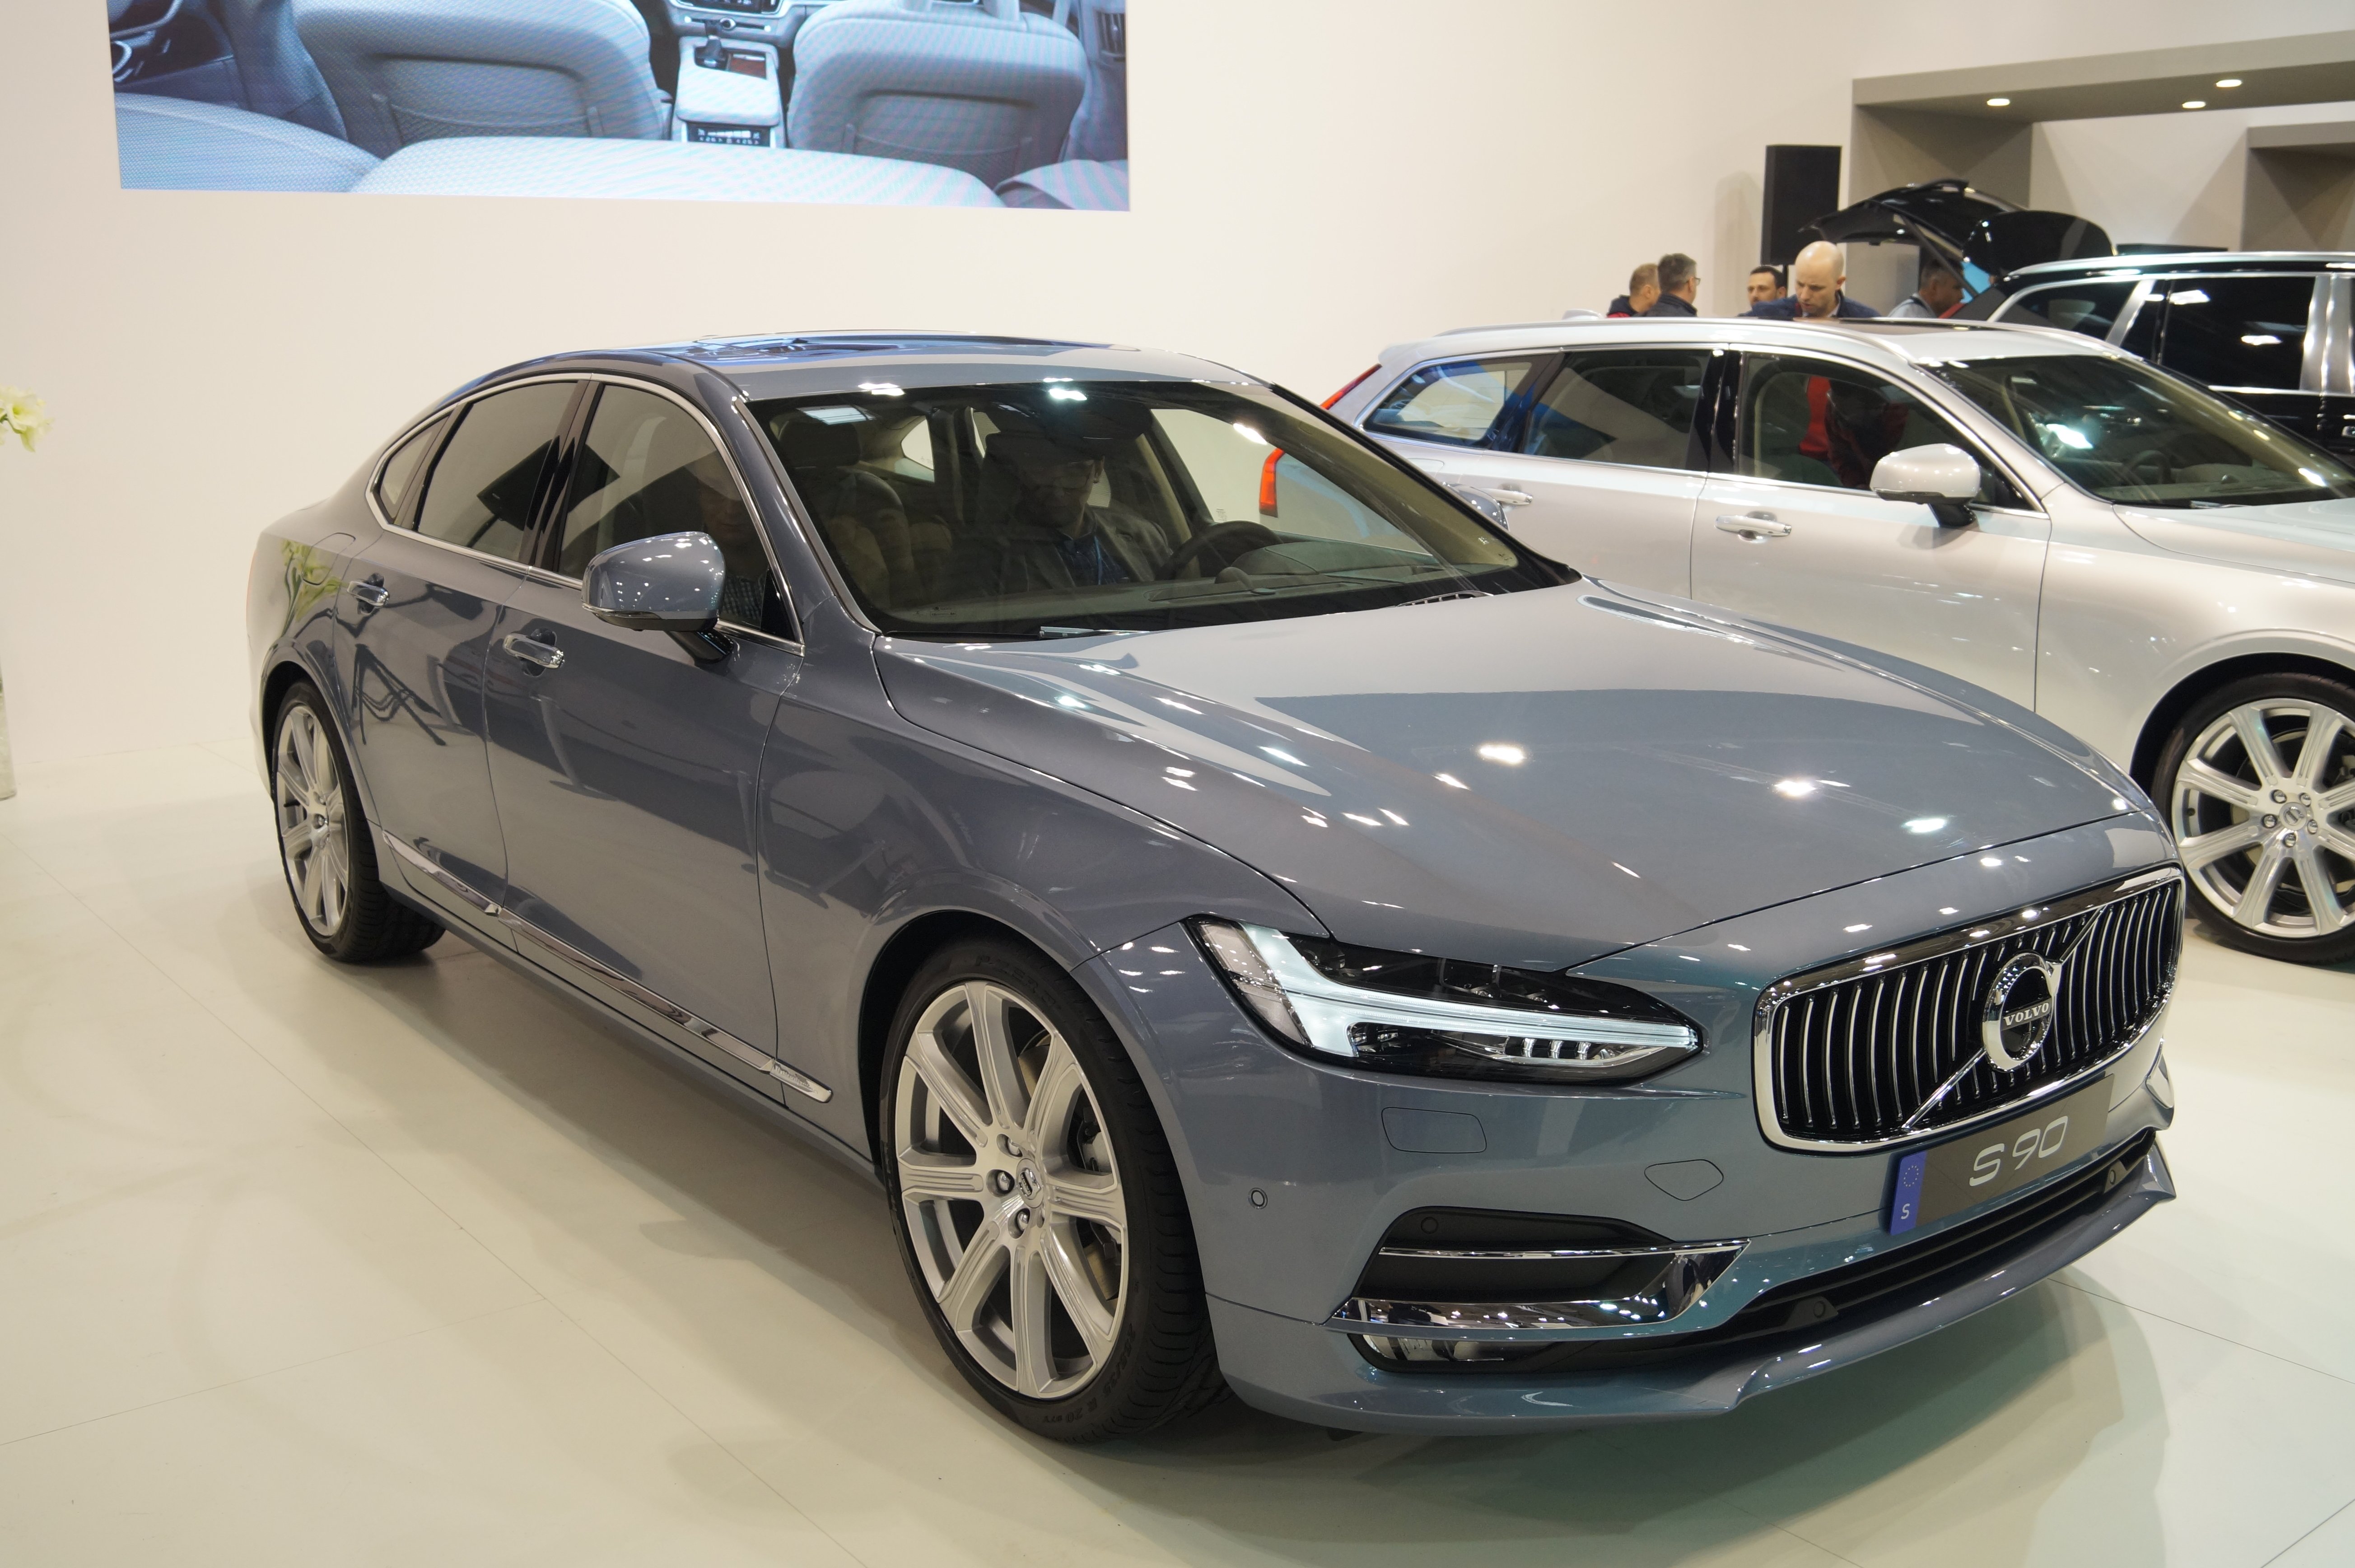 Volvo S90 Backgrounds, Compatible - PC, Mobile, Gadgets| 5215x3472 px